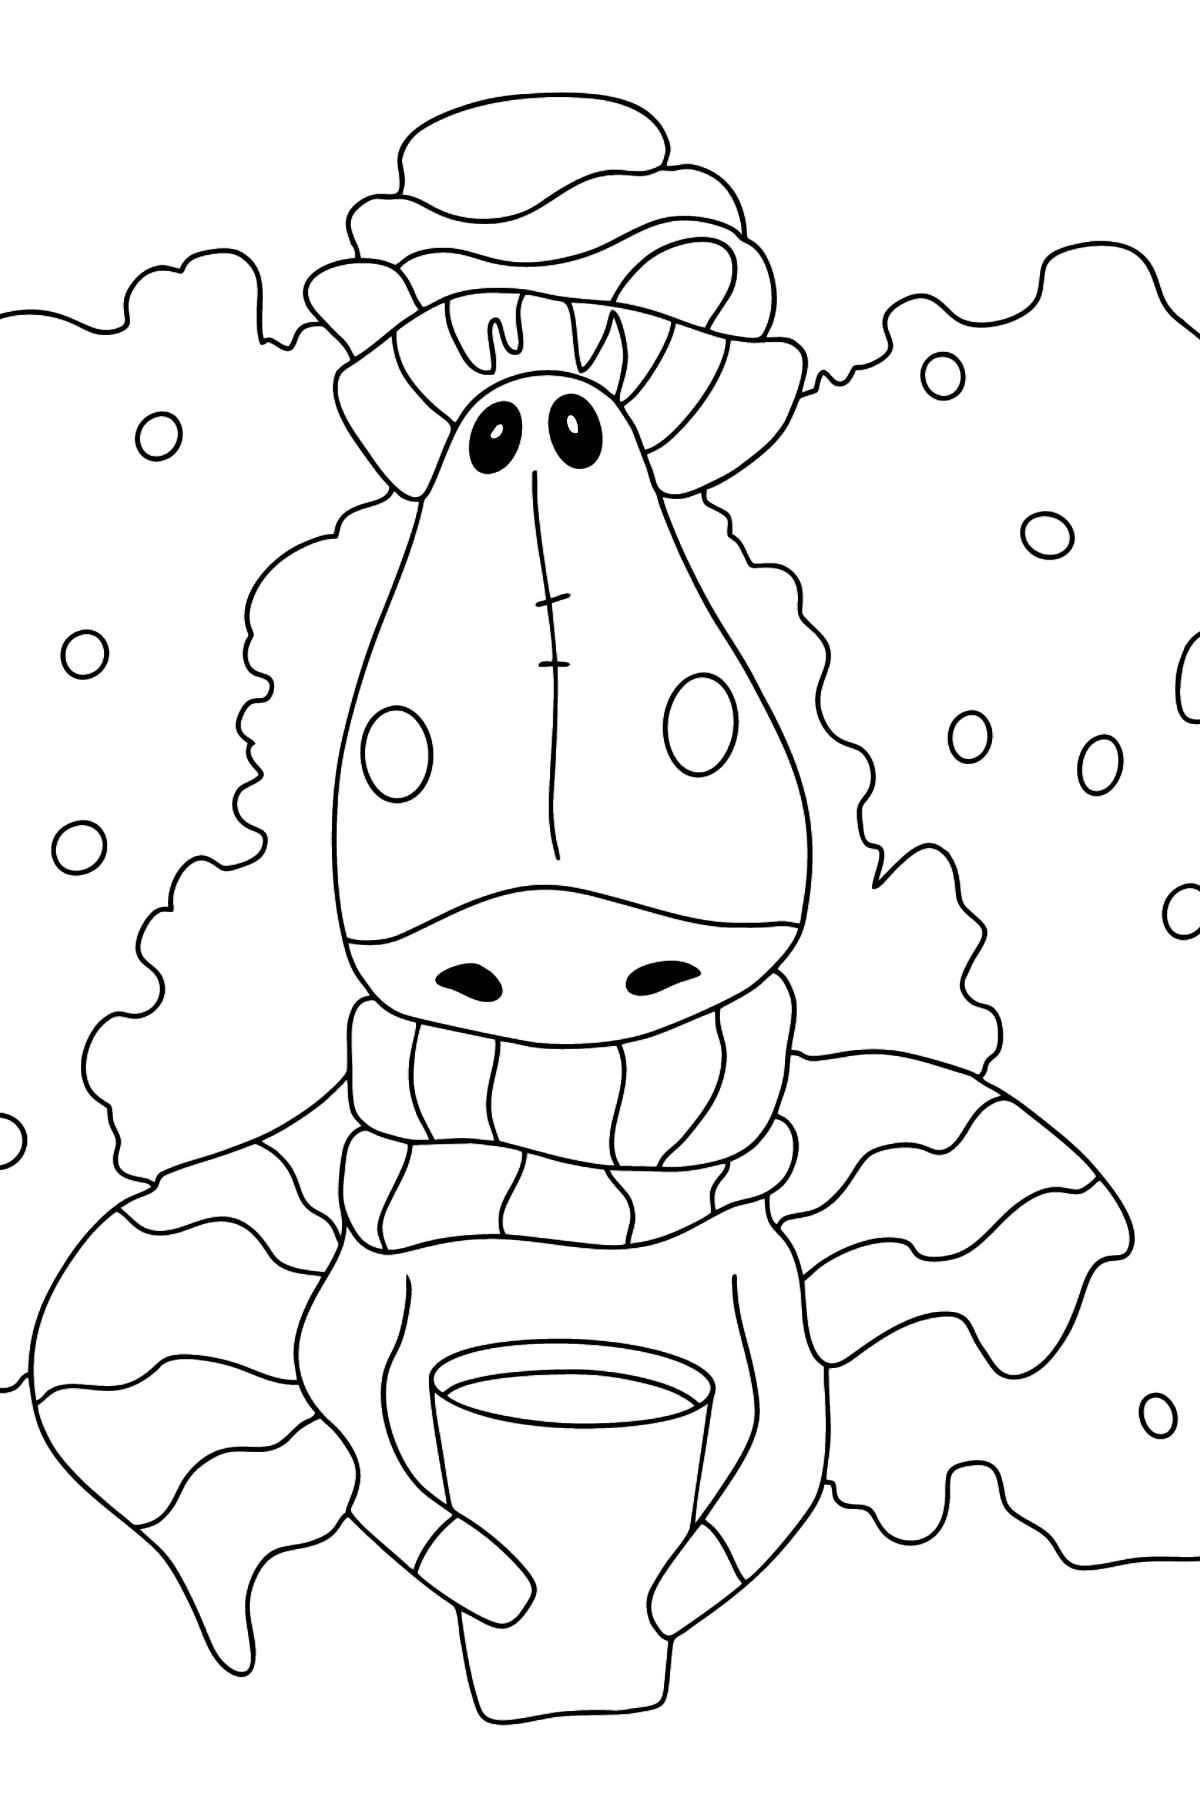 Complex coloring page horse in a scarf - Coloring Pages for Kids